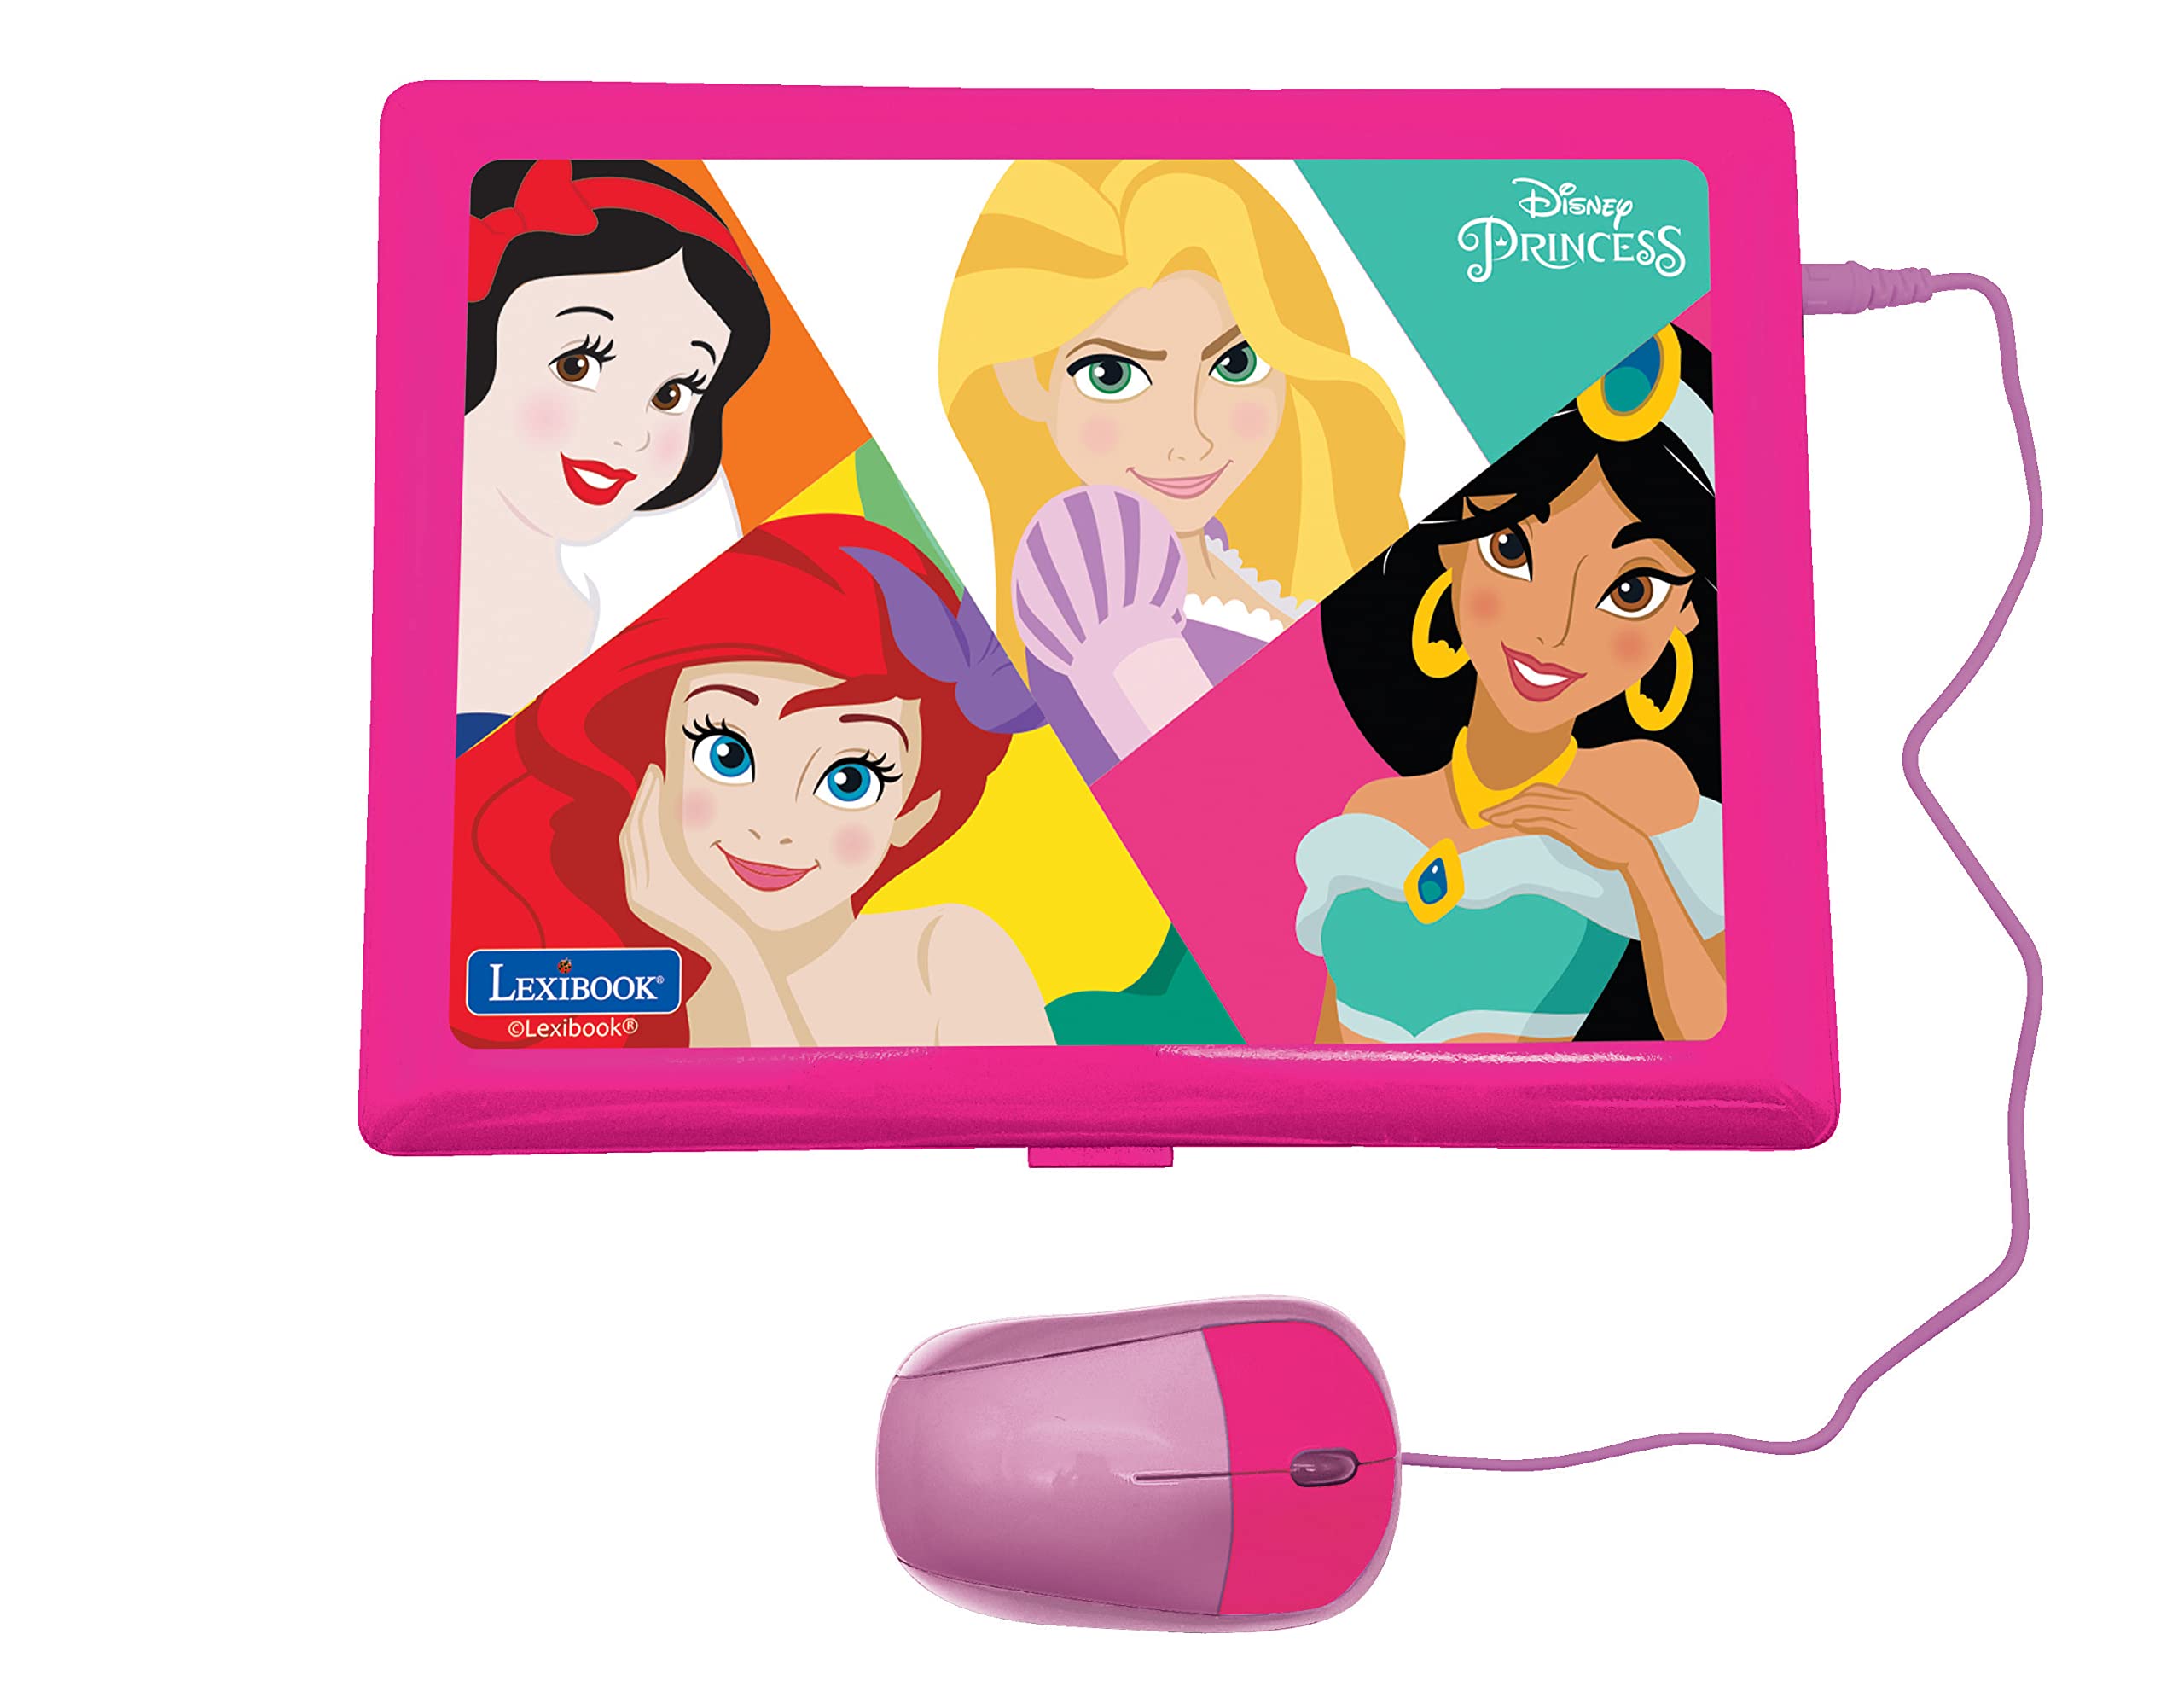 Lexibook Disney Princess - Educational and Bilingual Laptop Spanish/English - Girls Toy with 124 Activities to Learn, Play Games and Music - Pink JC598DPi2